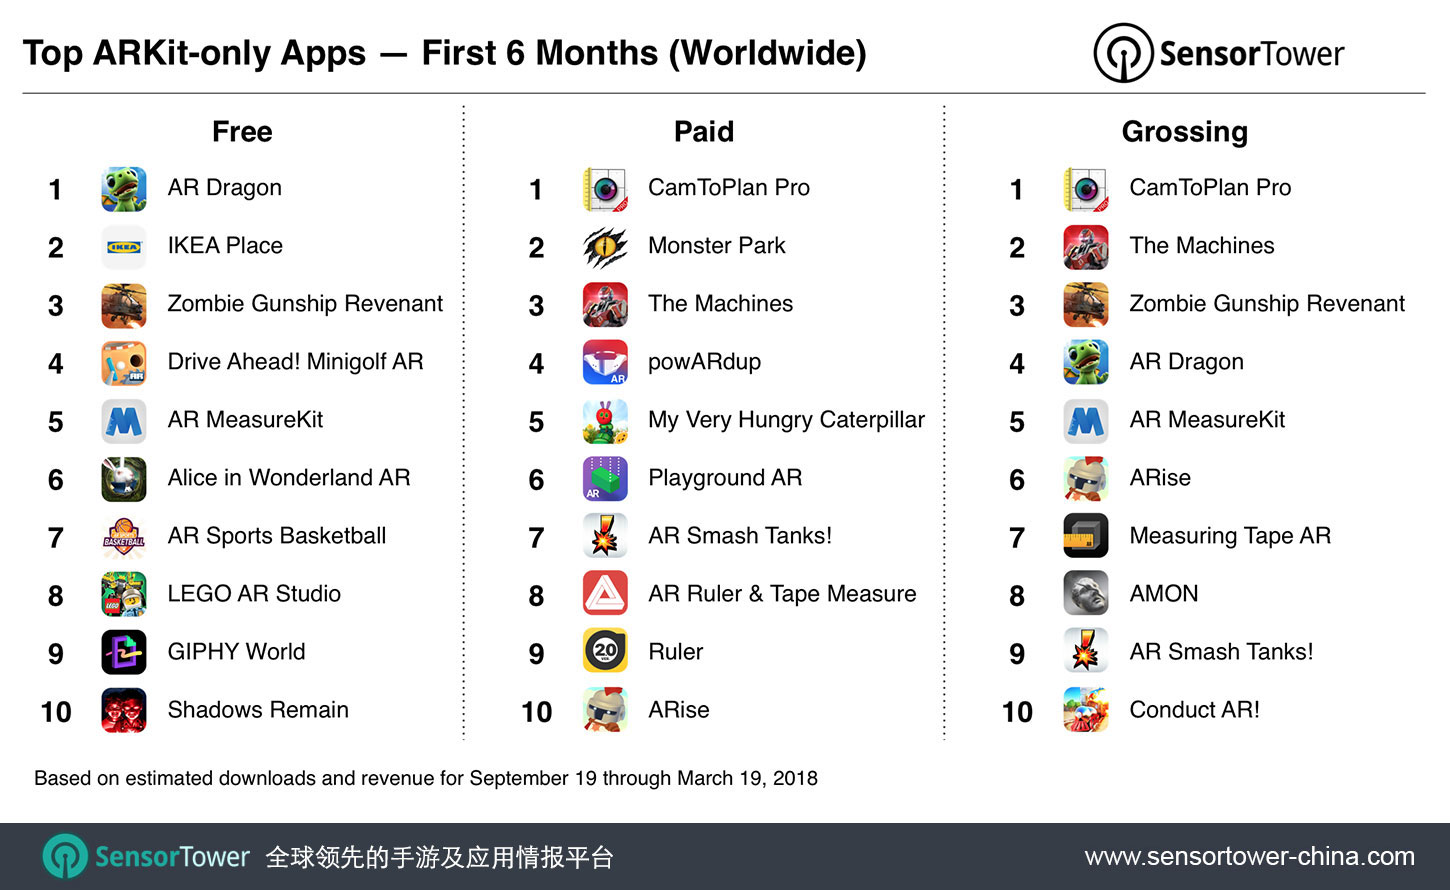 Ranking of top free, paid, and grossing ARKit apps overall for September 19, 2017 to March 19, 2018 CN